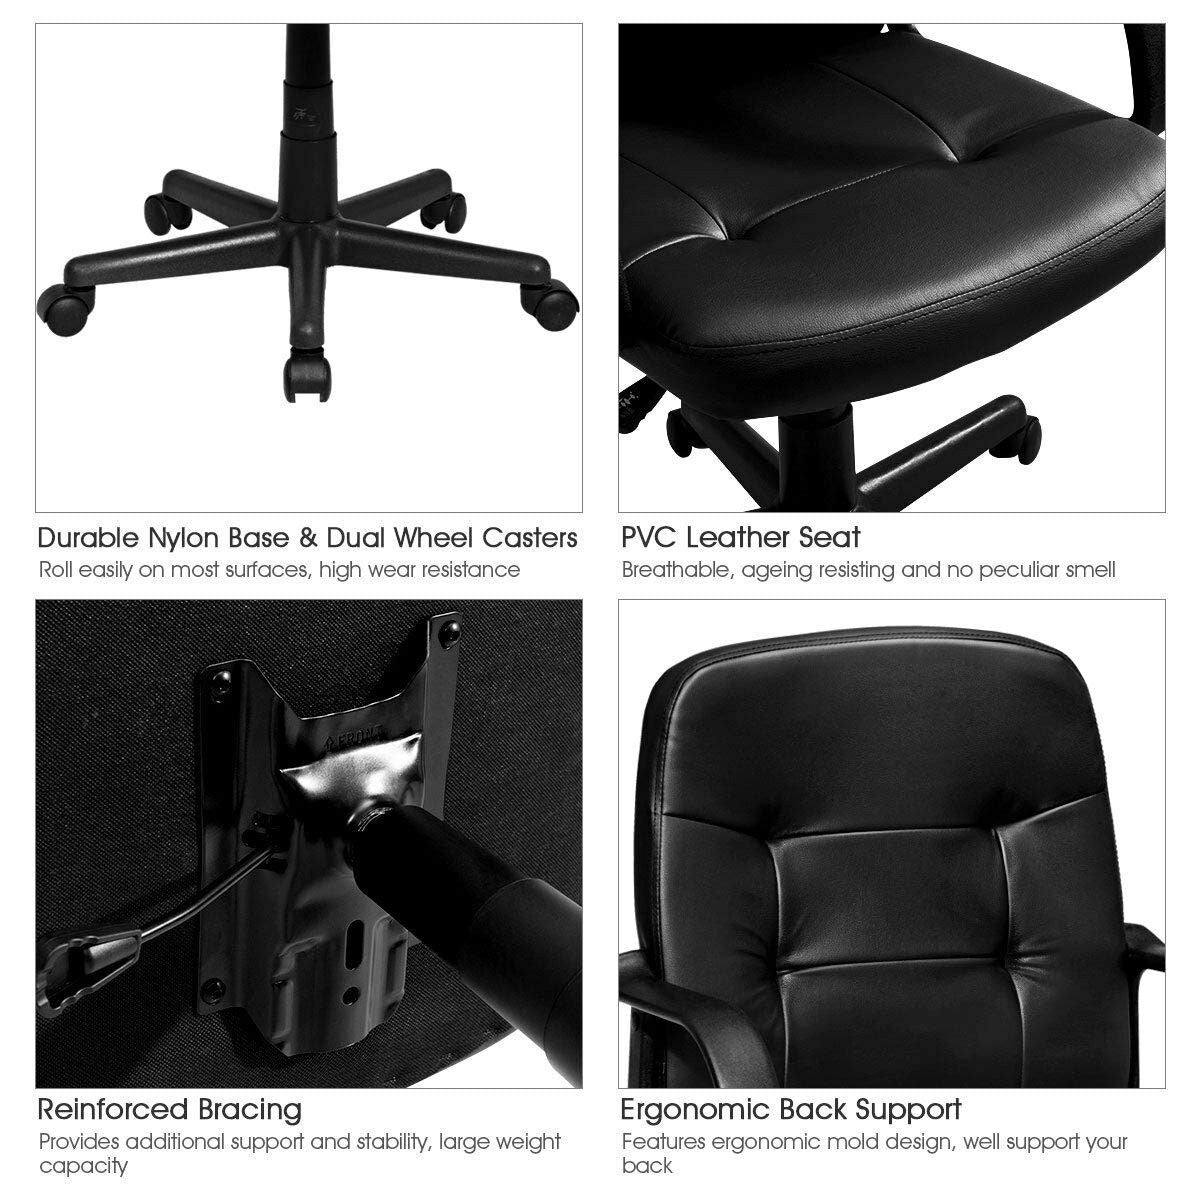 Executive Chair Mid Back Office W/Arms and Swivel Wheels